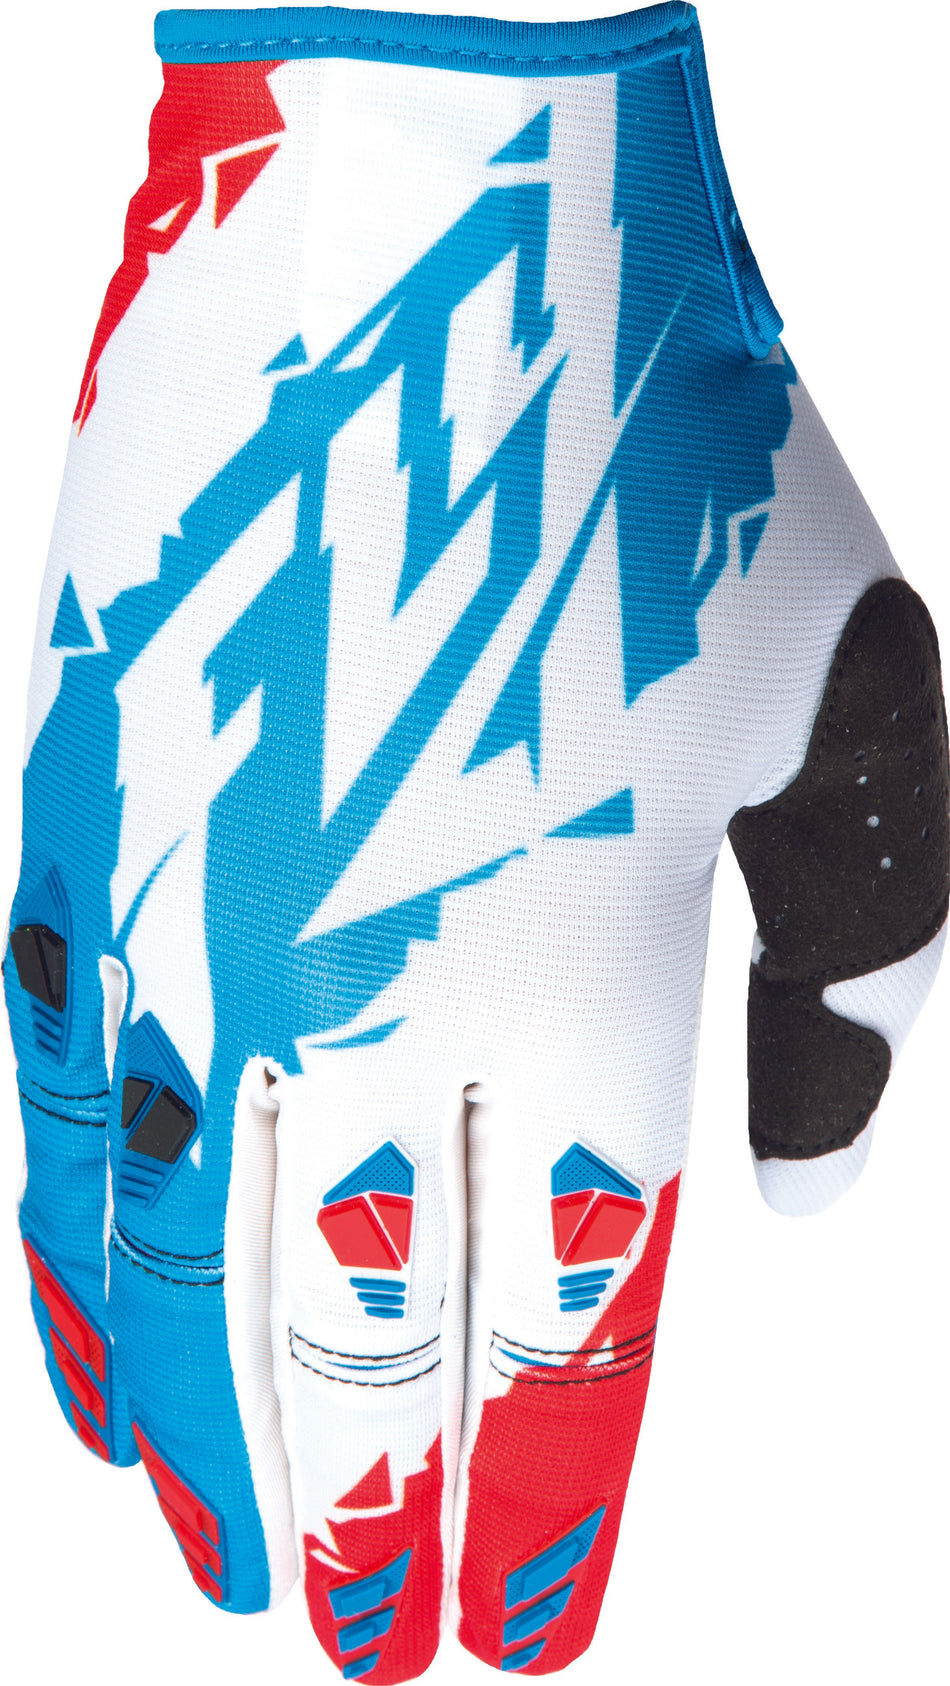 FLY RACING Kinetic Glove Red/White/Blue Sz 5 Ym 370-41105